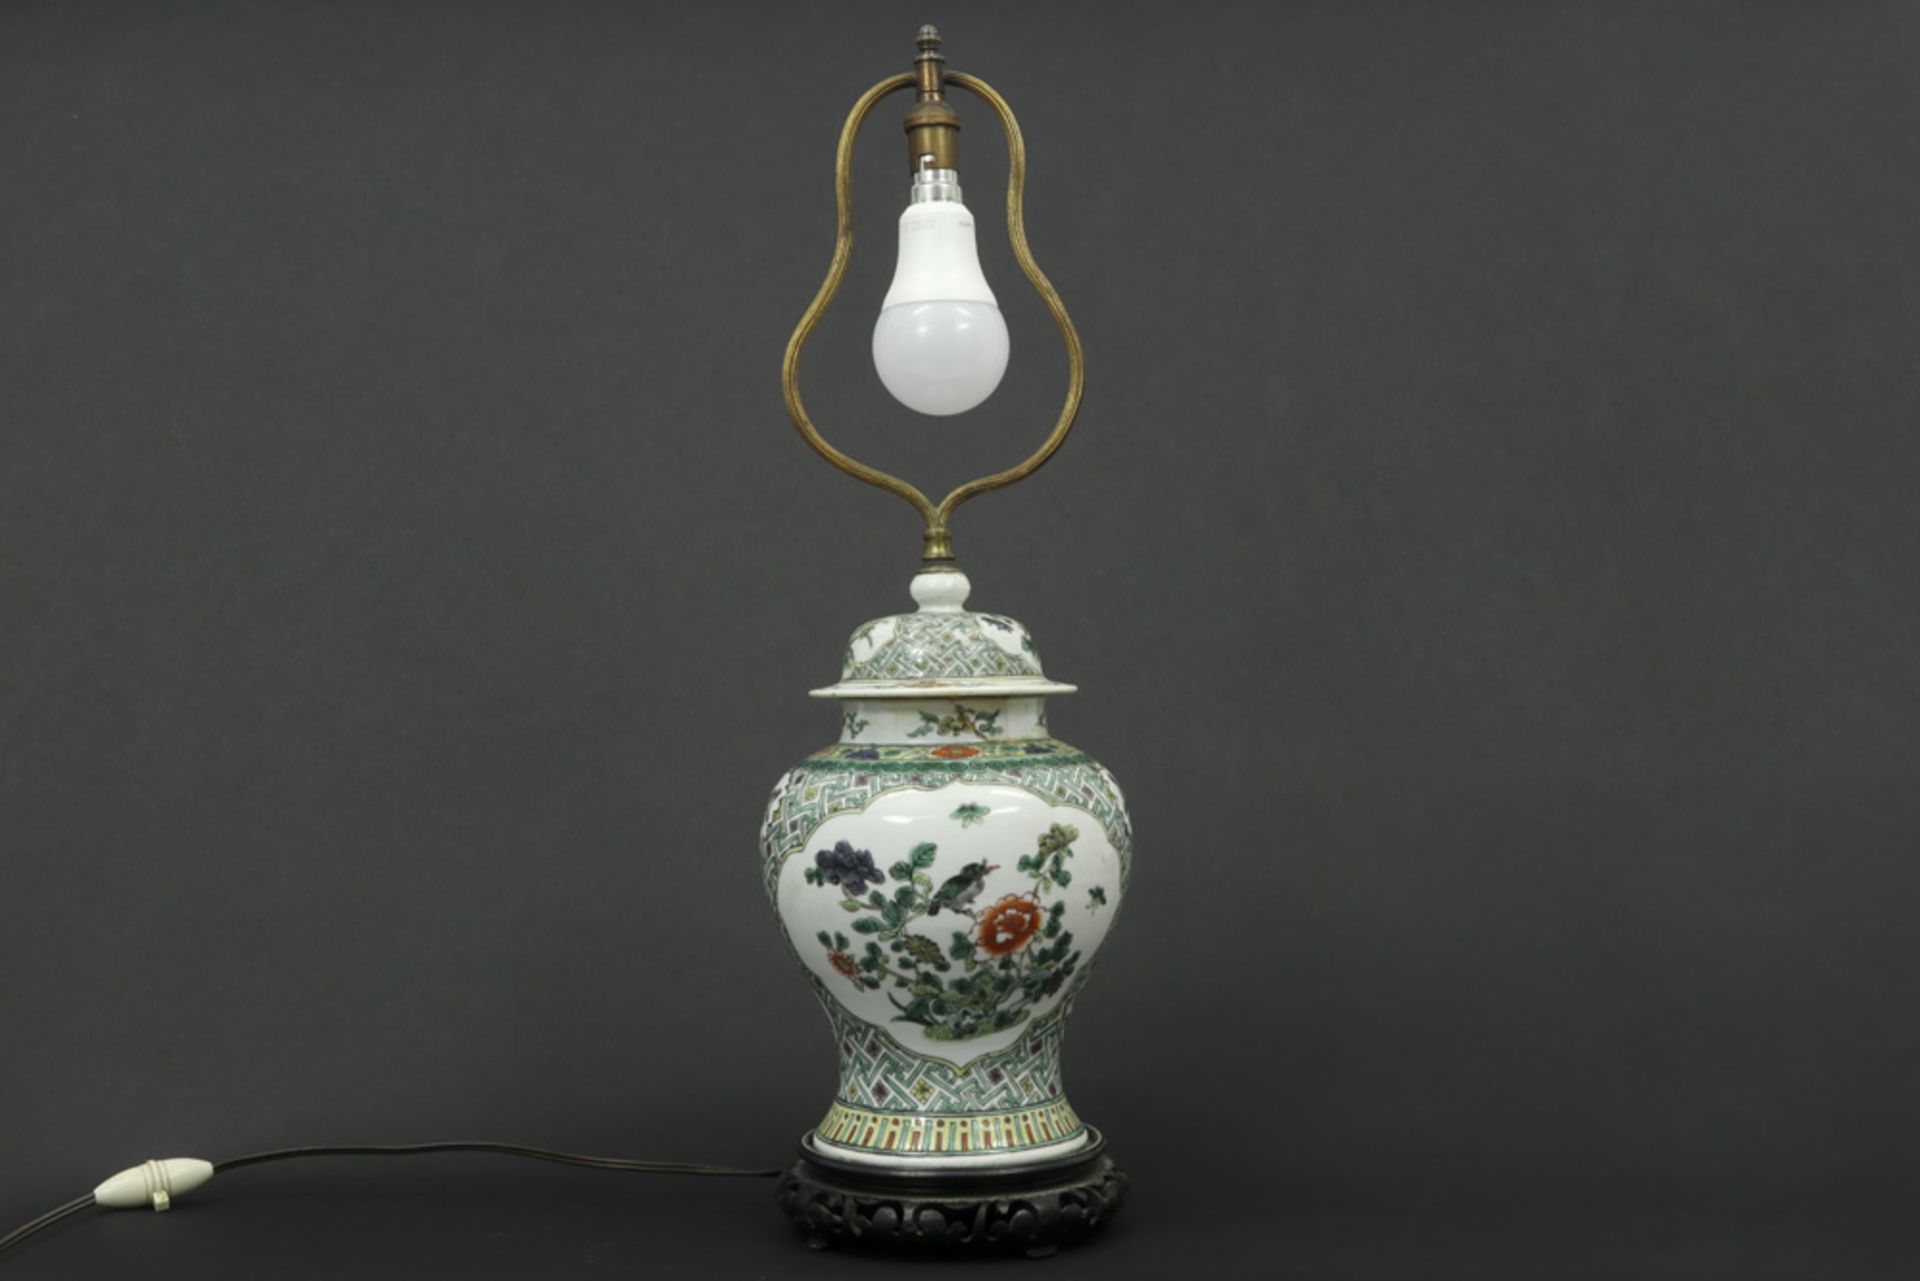 lidded Chinese vase in porcelain with a Famille Verte decor - made into a lamp || Gedekselde Chinese